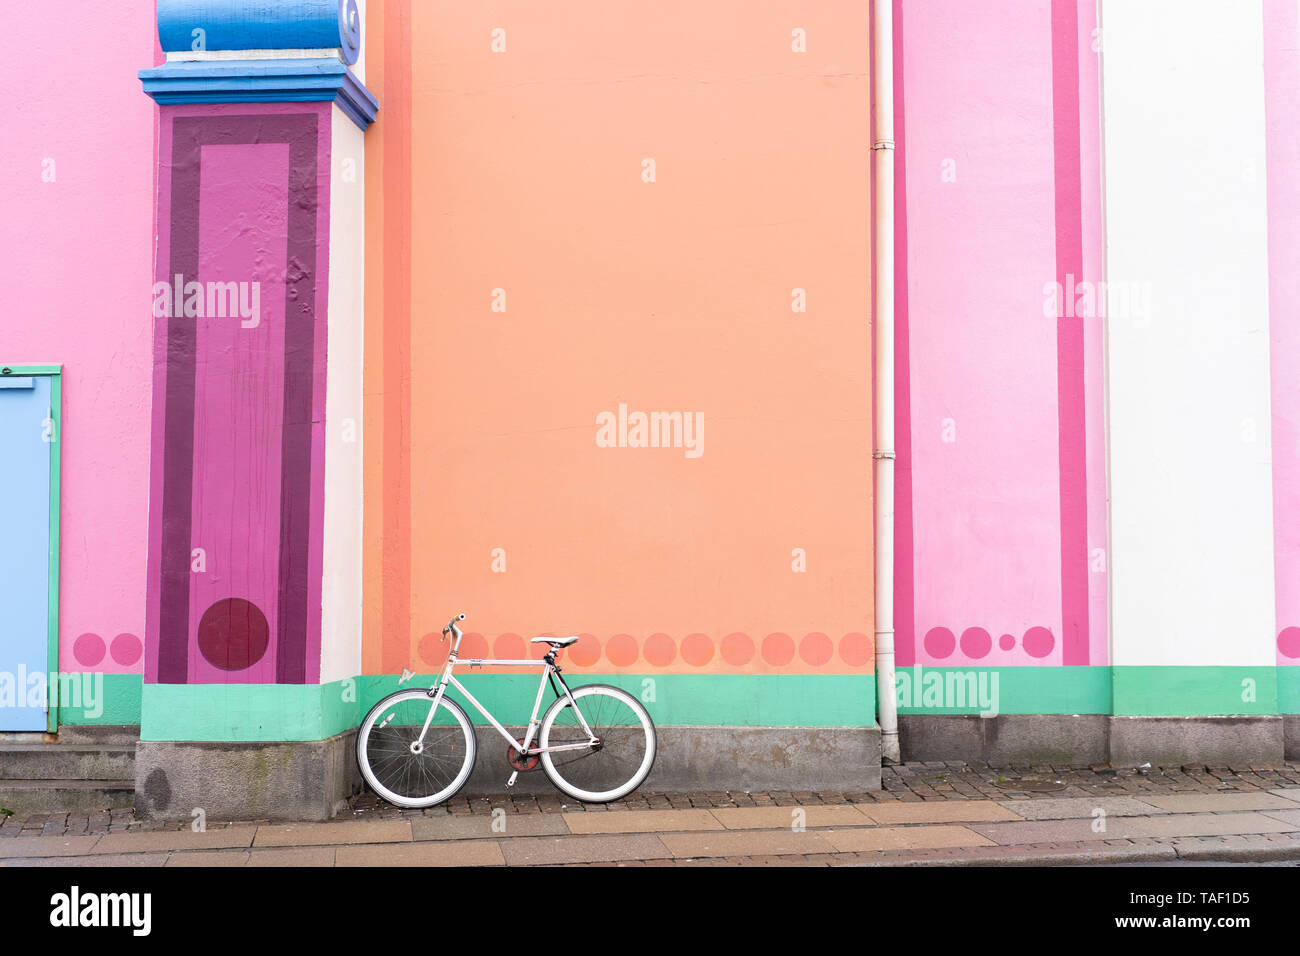 Danemark, copenhague, location leaning on colorful wall Banque D'Images